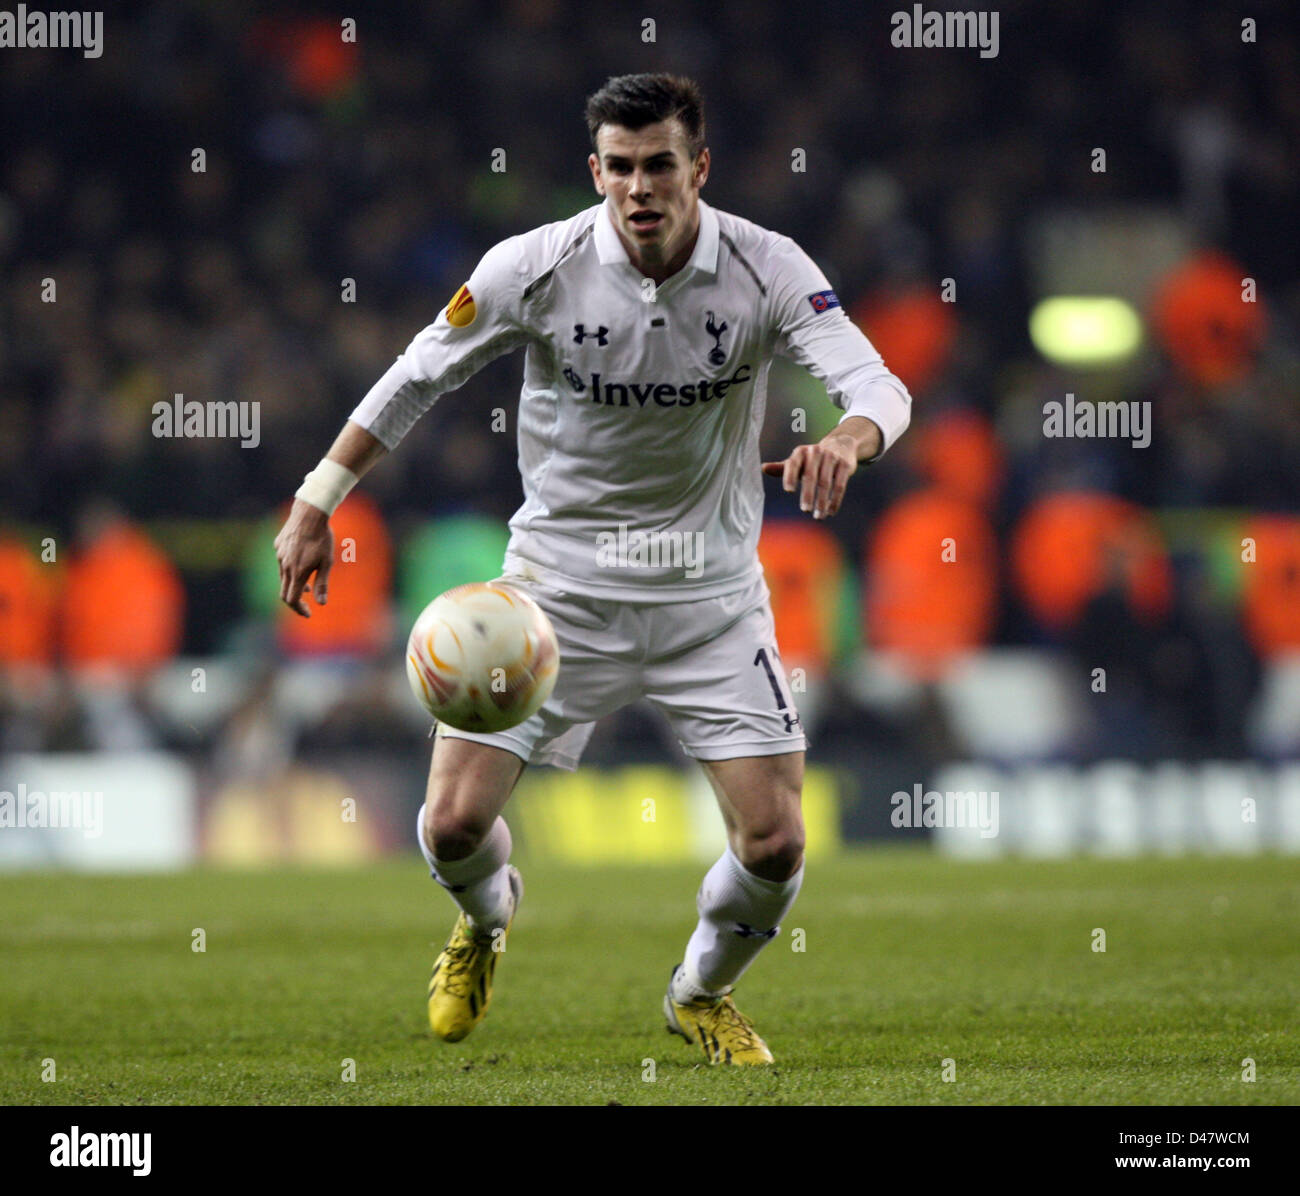 07.03.2013 London, England. Gareth Bale of Tottenham Hotspur during the Europa League game between Tottenham Hotspur and Inter Milan from White Hart Lane. Tottenham won the first leg tie by a score of 3-0. Stock Photo